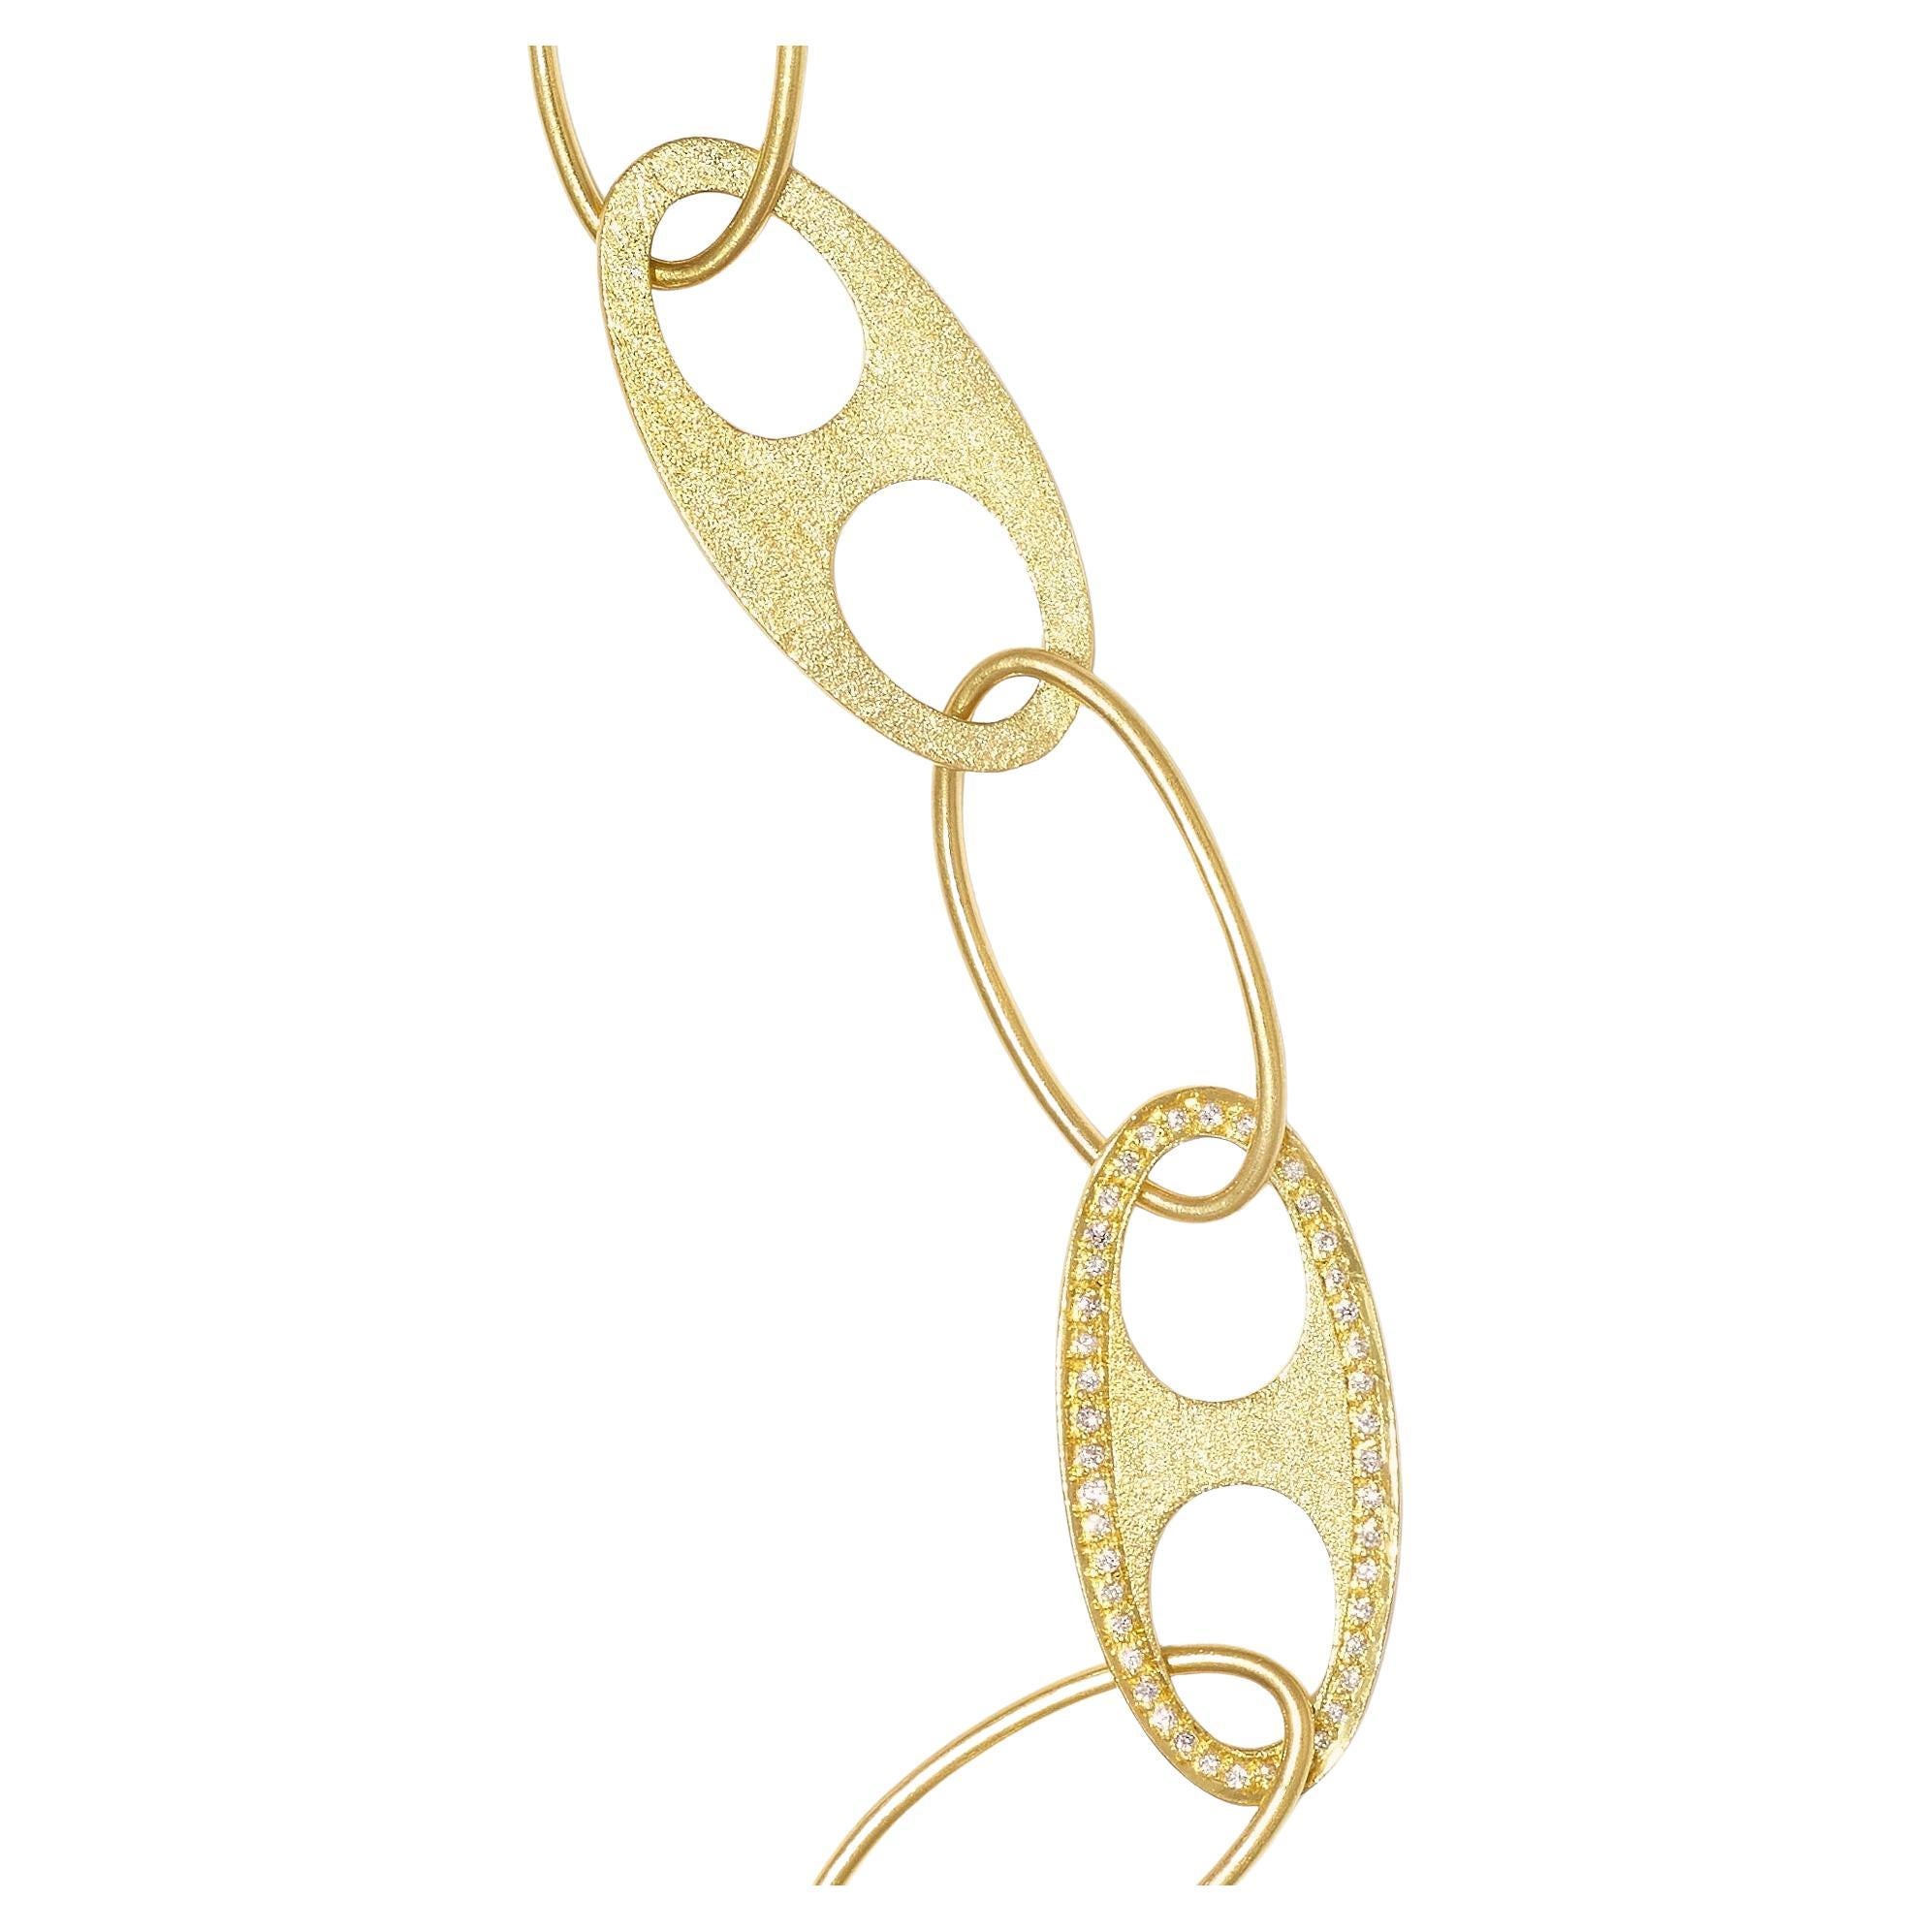 Rosior Contemporary Link Bracelet in Yellow Gold Set with Diamonds